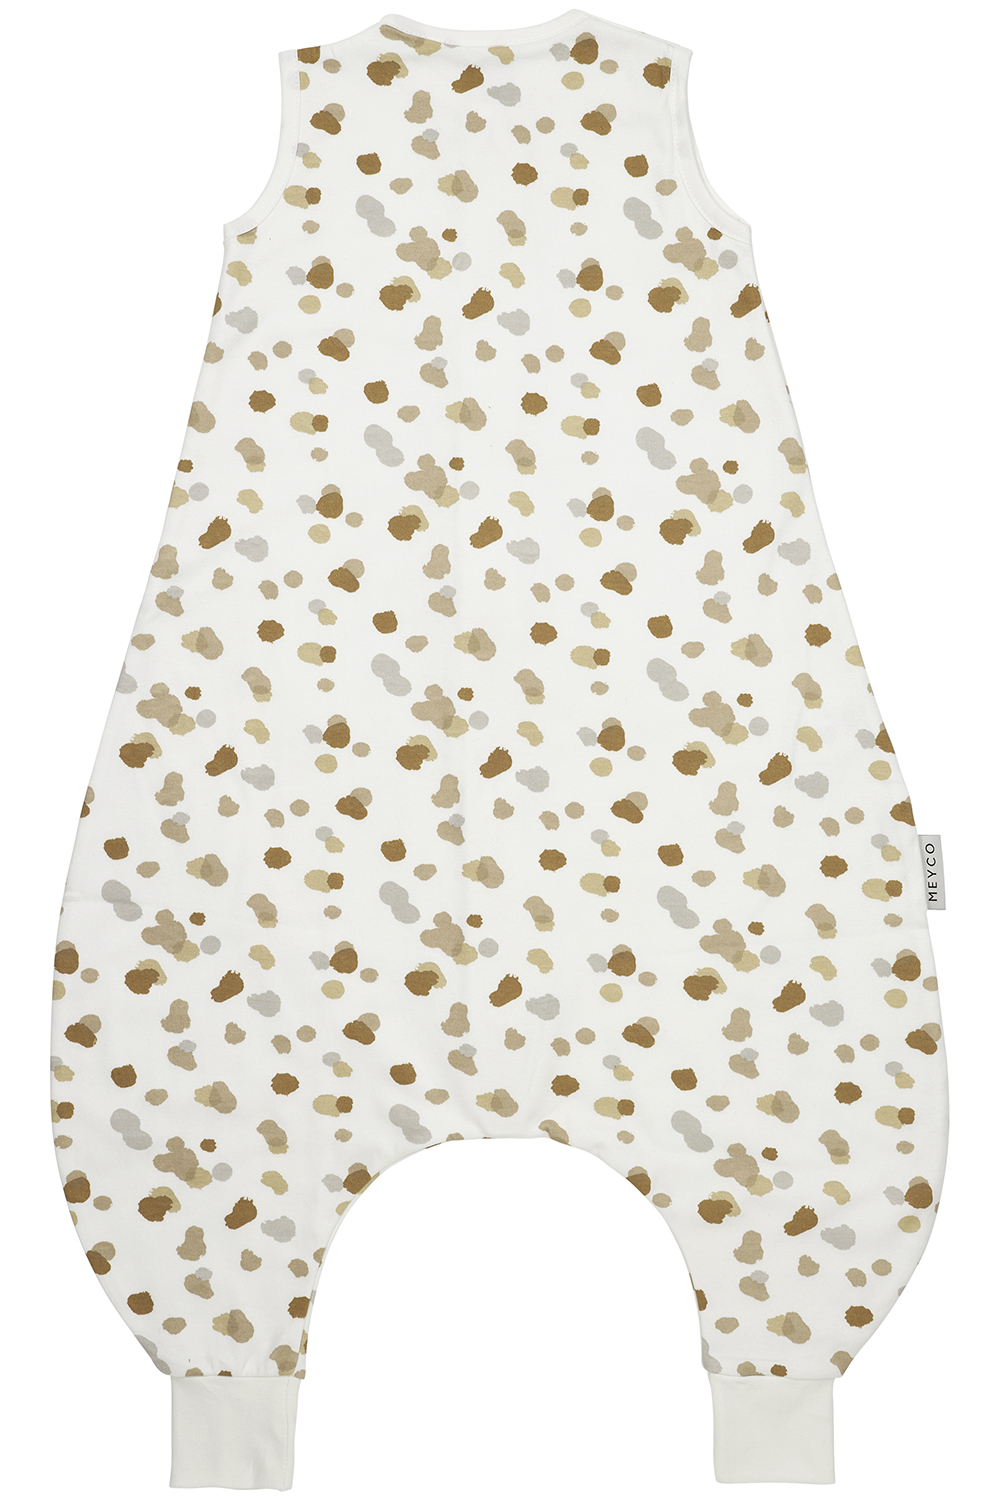 Baby zomer slaapoverall jumper Stains - sand - 80cm